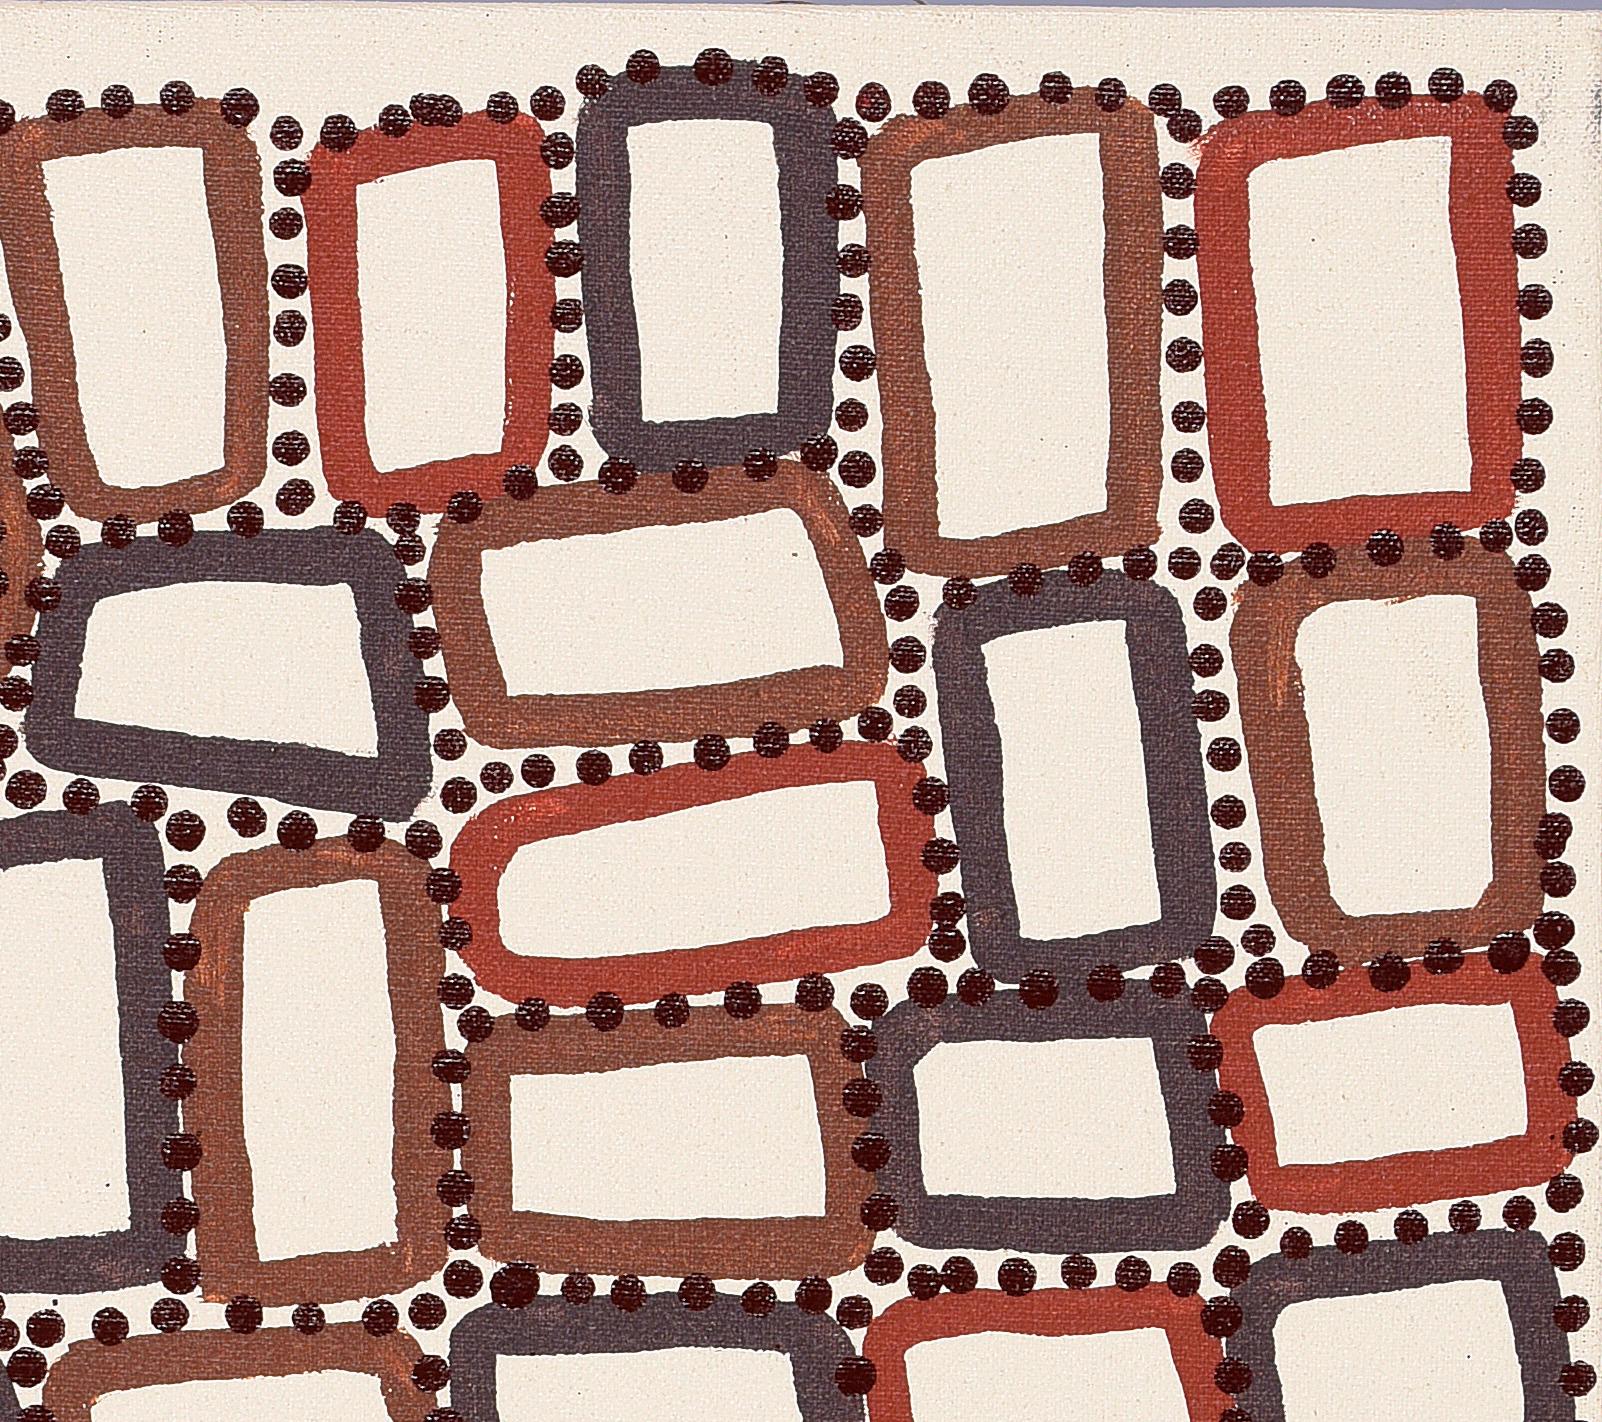 Since he began painting in 1997, Walala Tjapaltjarri has gained worldwide recognition, participating in several national and international solo and group exhibitions. His paintings are represented in private and public collections in Australia,